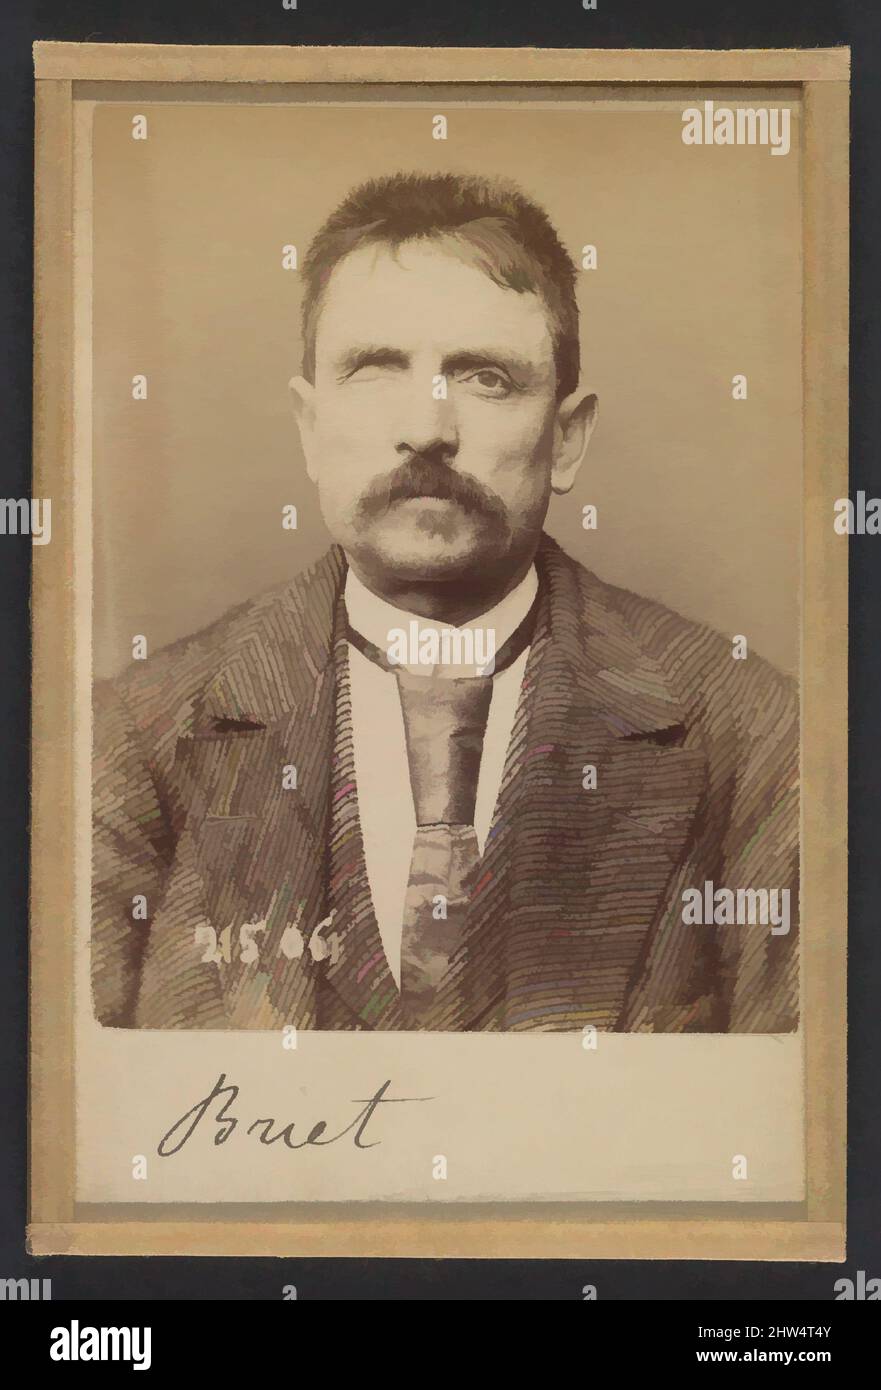 Art inspired by Briet. Albert, Louis. 44 ans, né à Lyon (Rhône). Boulanger. Anarchiste. 4/3/94., 1894, Albumen silver print from glass negative, 10.5 x 7 x 0.5 cm (4 1/8 x 2 3/4 x 3/16 in.) each, Photographs, Alphonse Bertillon (French, 1853–1914), Born into a distinguished family of, Classic works modernized by Artotop with a splash of modernity. Shapes, color and value, eye-catching visual impact on art. Emotions through freedom of artworks in a contemporary way. A timeless message pursuing a wildly creative new direction. Artists turning to the digital medium and creating the Artotop NFT Stock Photo